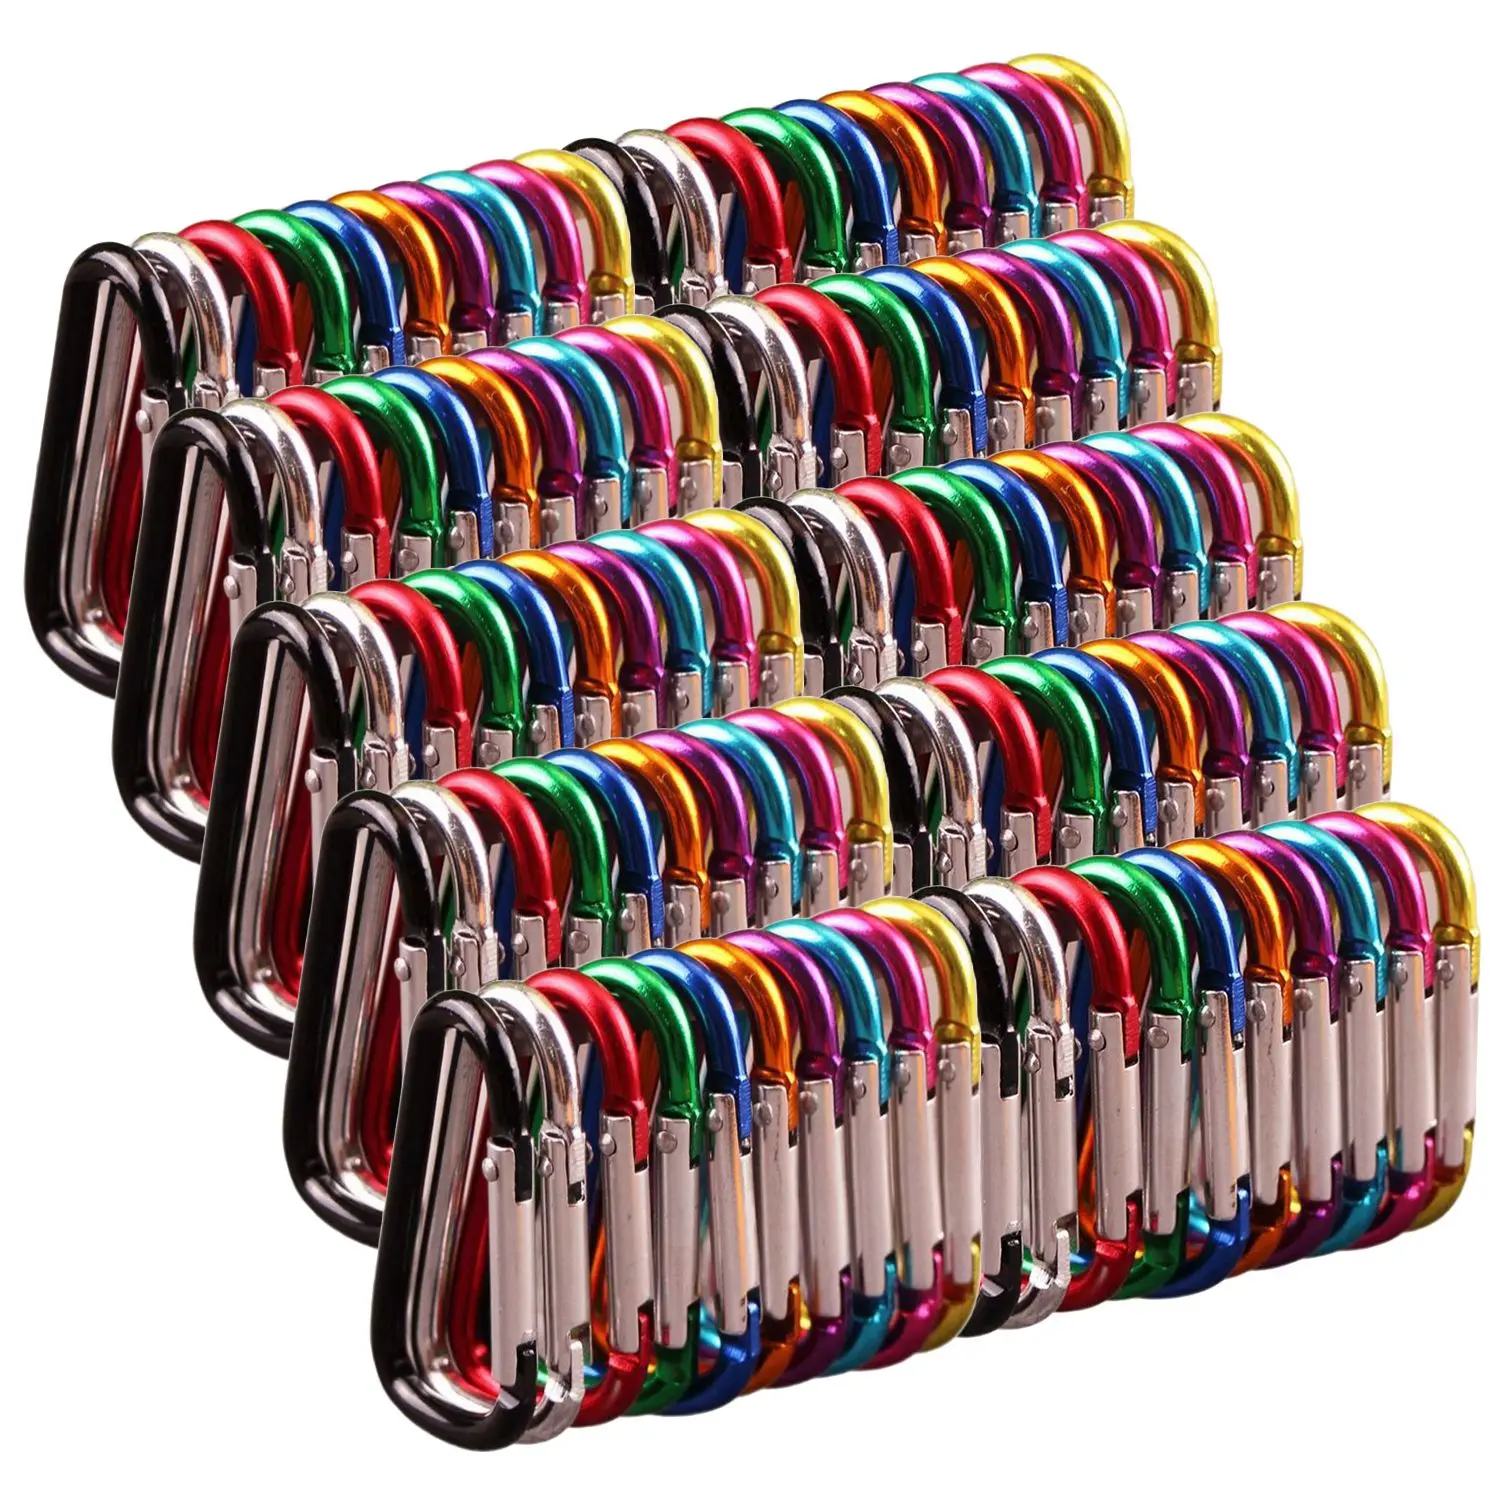 100PCS/Lot Colorful Aluminium Alloy Climbing Buckle Keychain Carabiner Safety - $20.46